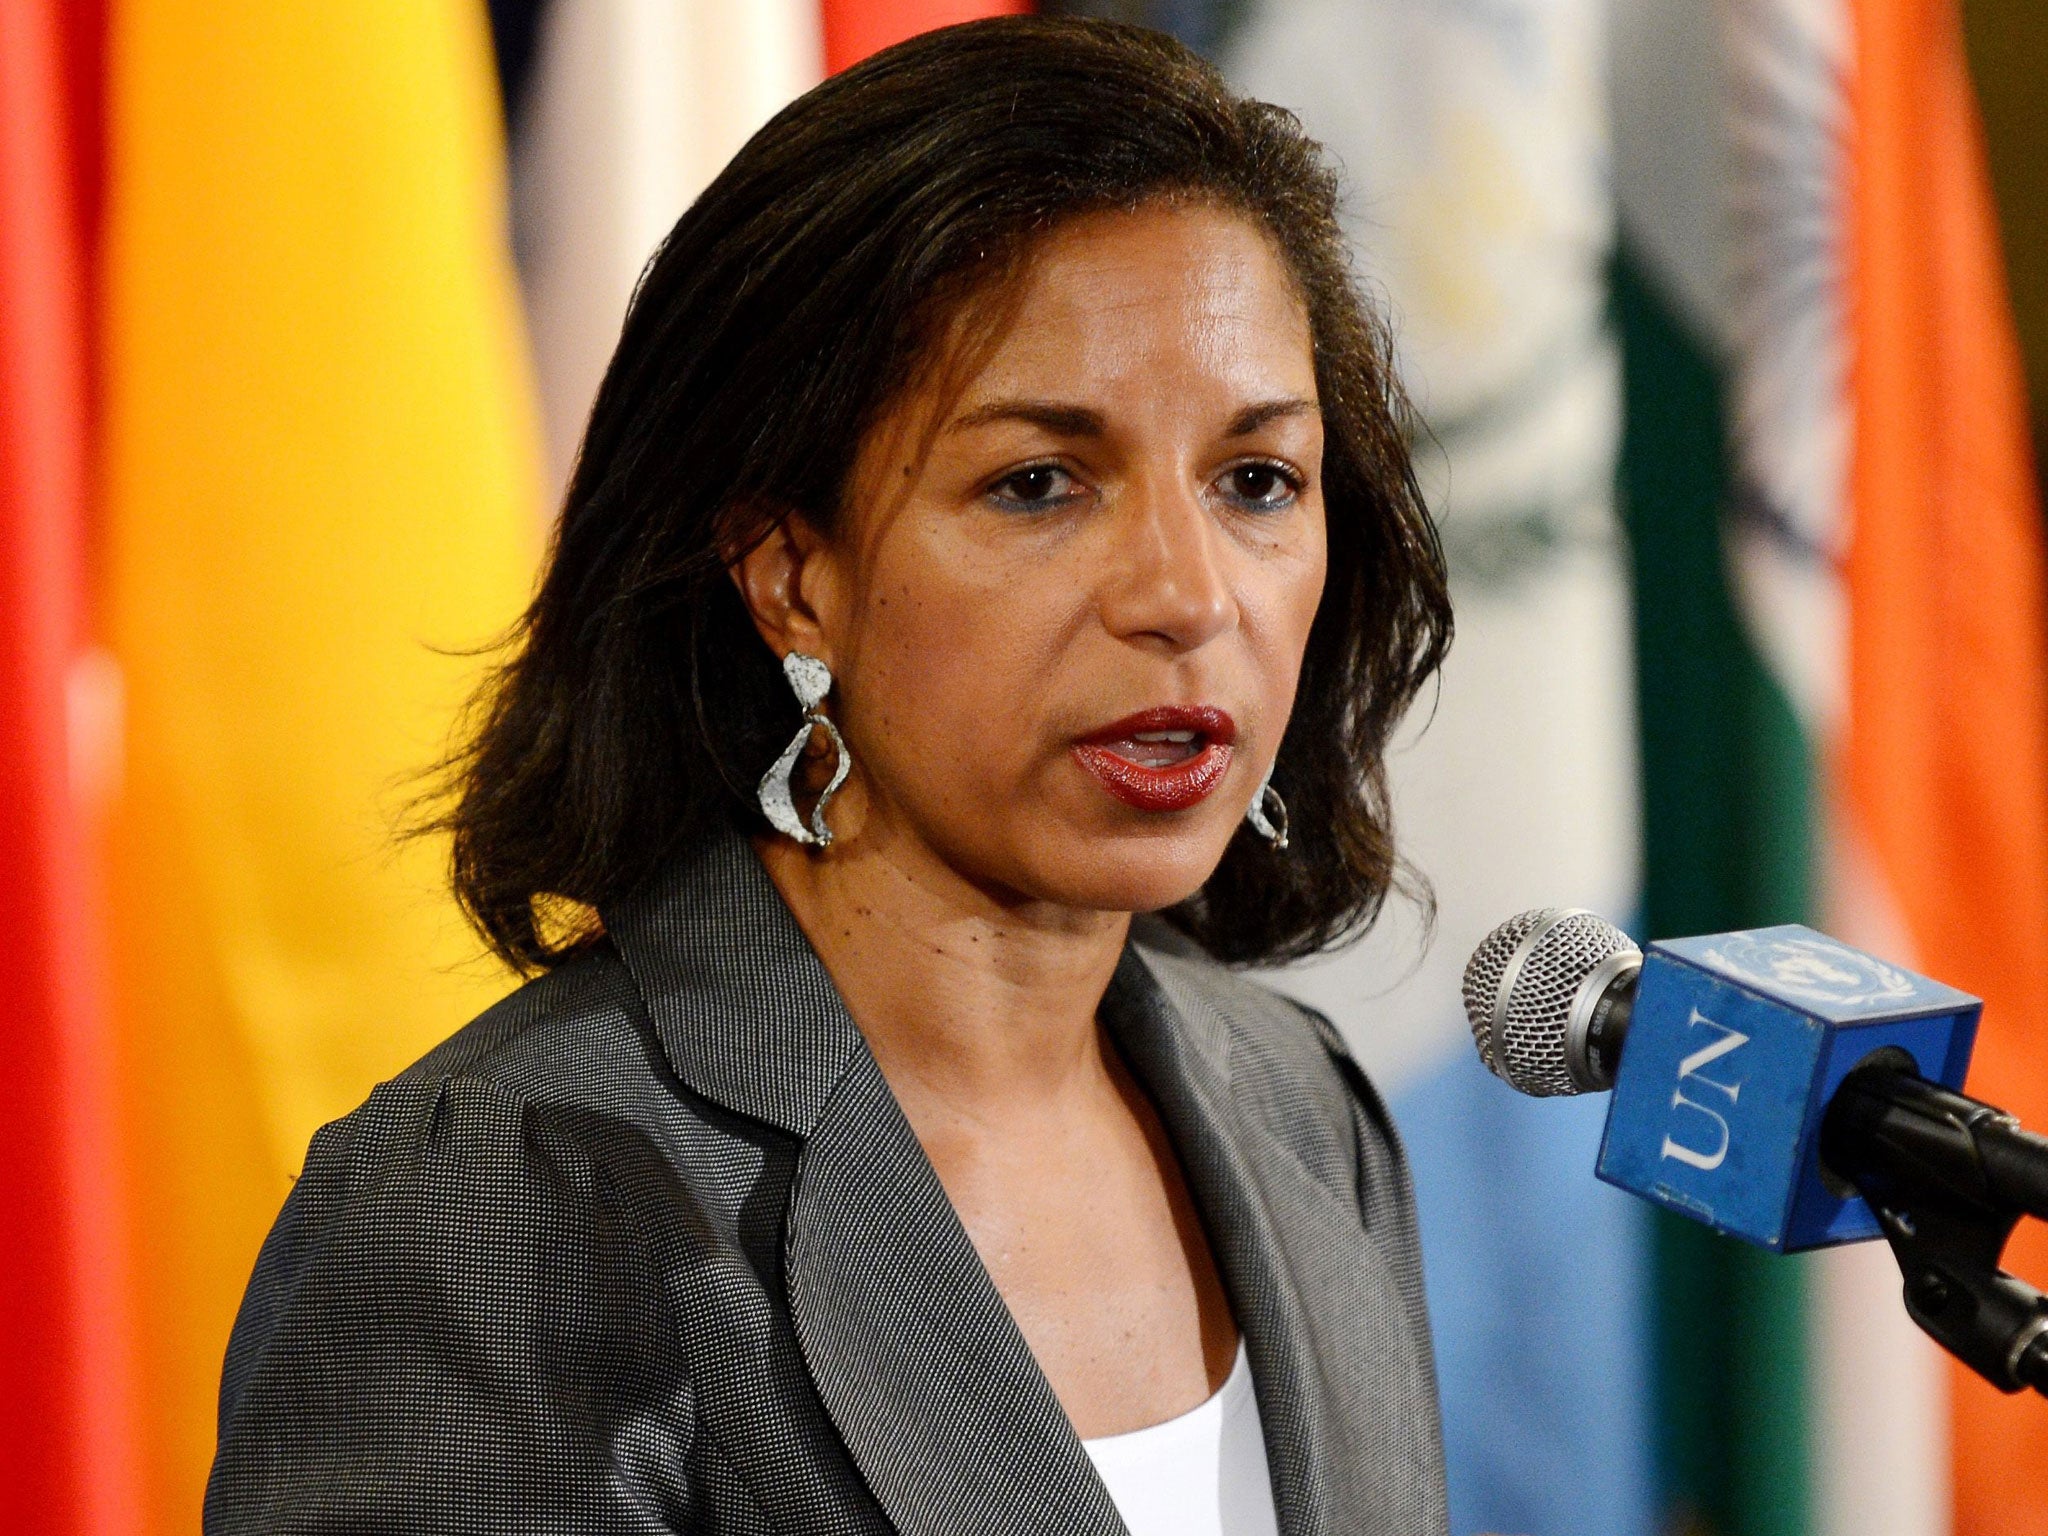 Susan Rice has withdrawn from consideration for Secretary of State